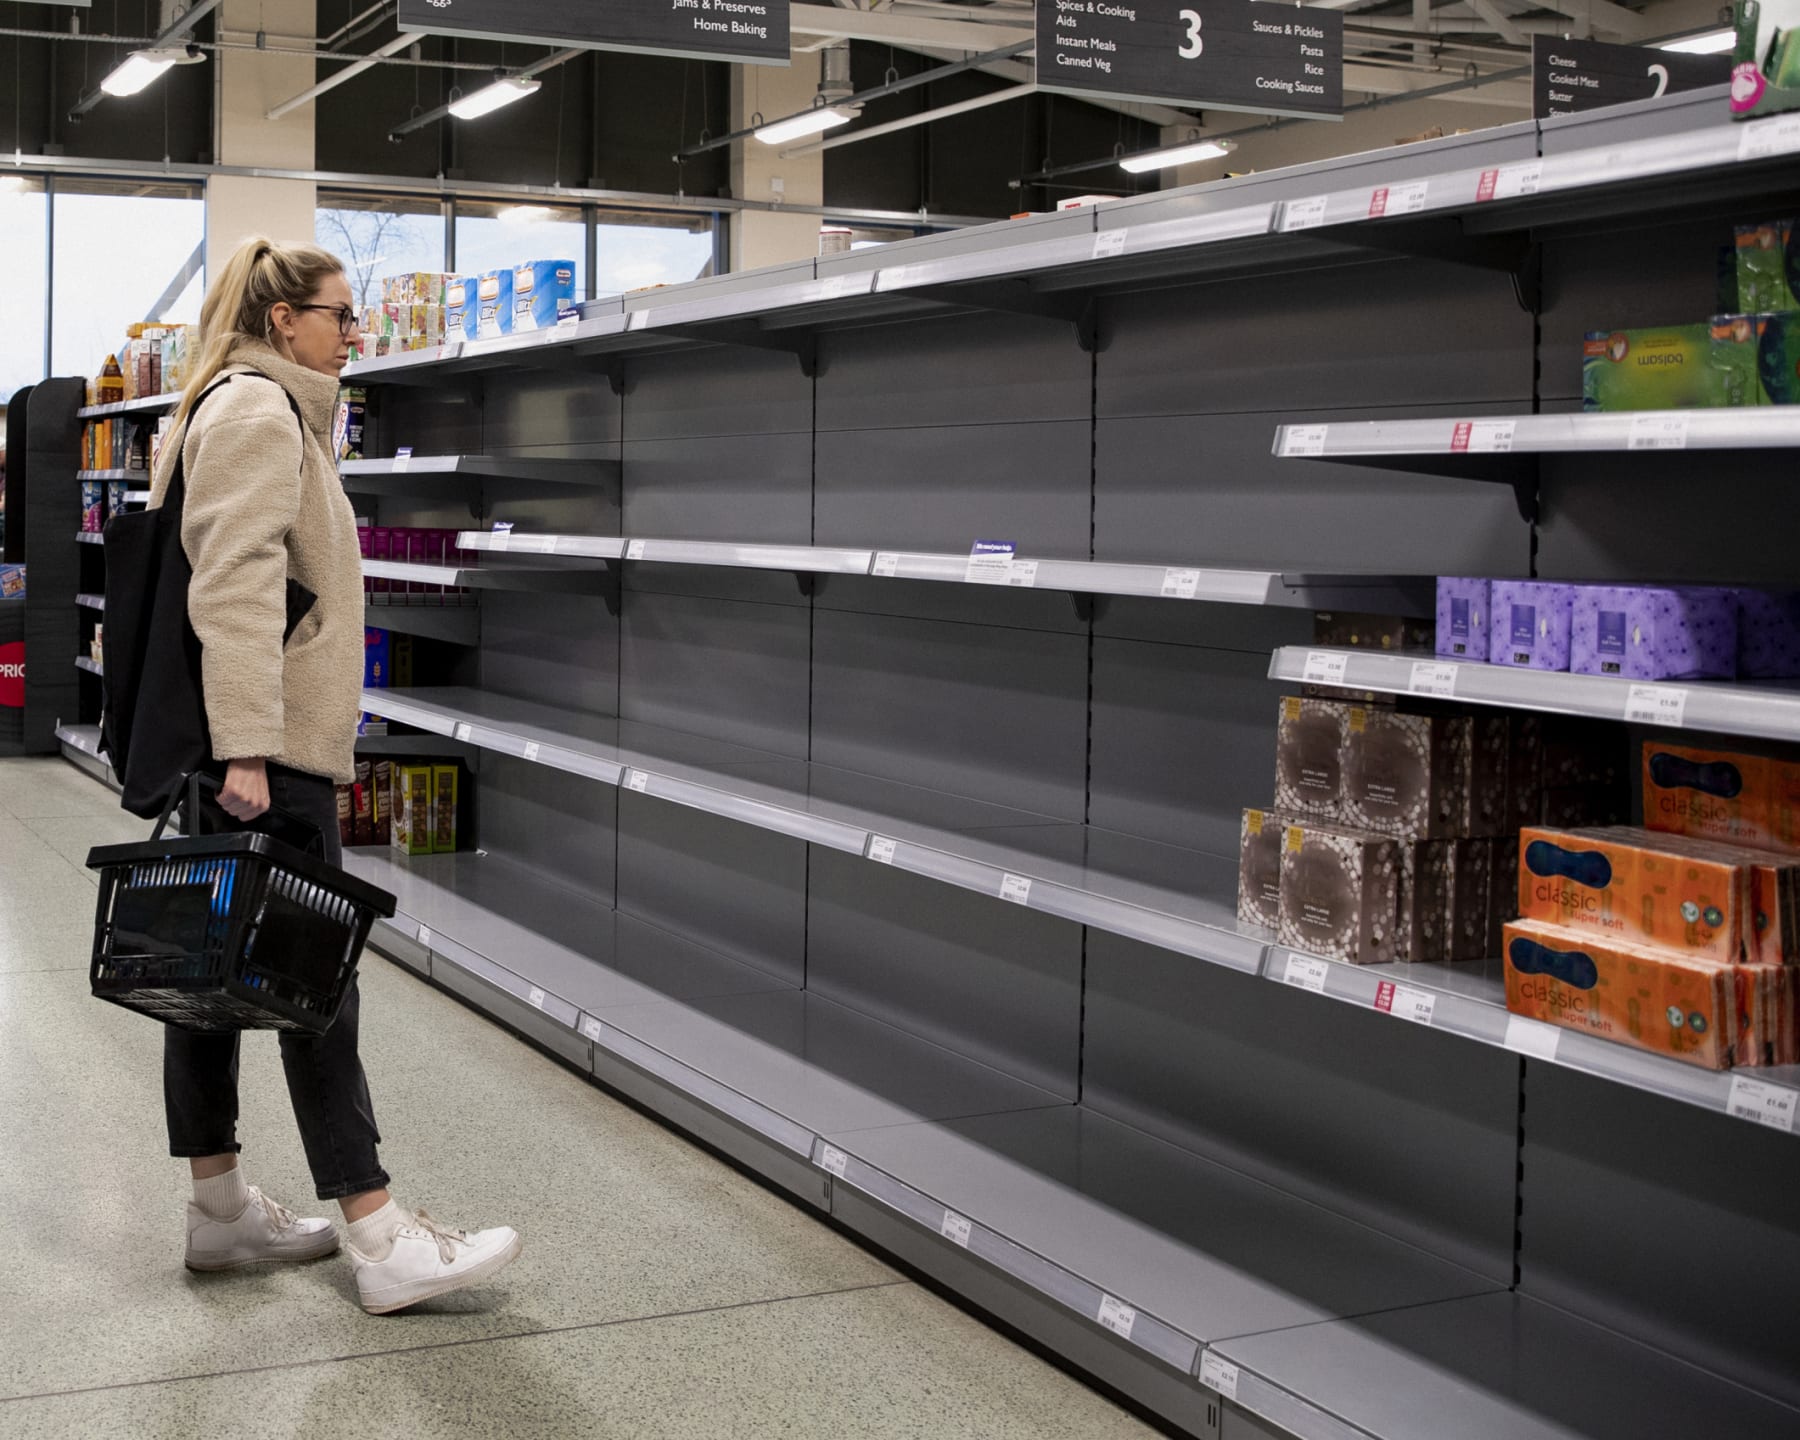 Woman looks at empty shelves in grocery store.